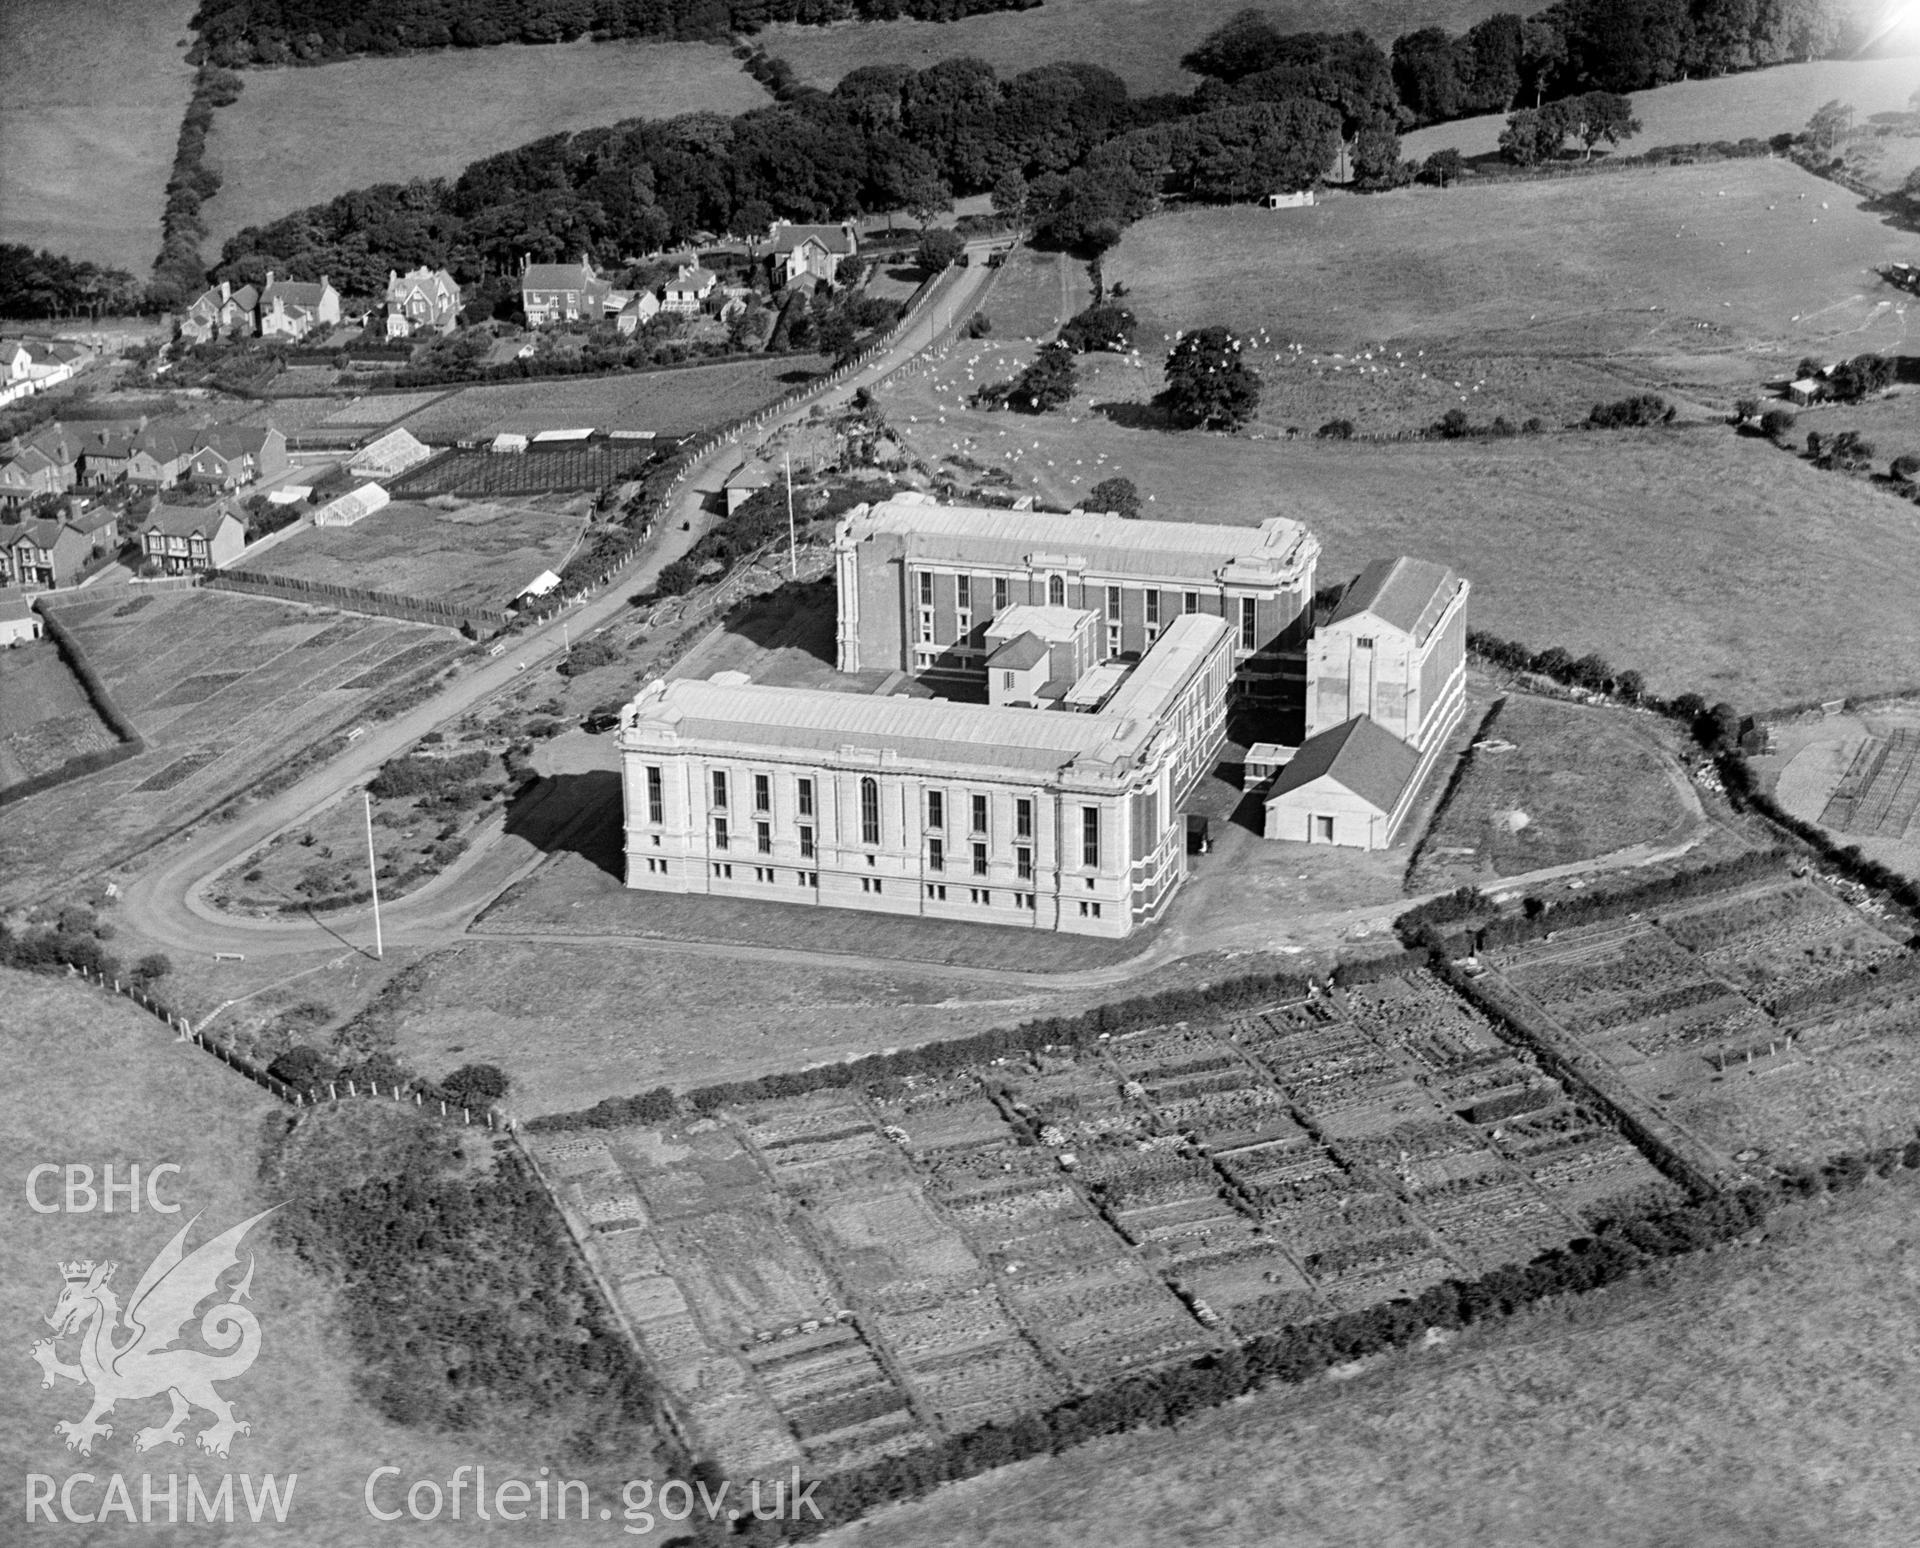 Digital copy of a black and white, oblique aerial photograph of the National Library of Wales, Aberystwyth. The photograph shows the view from the South East, before the main West facade was built and also showing the library's allotment gardens, now covered by a car park.